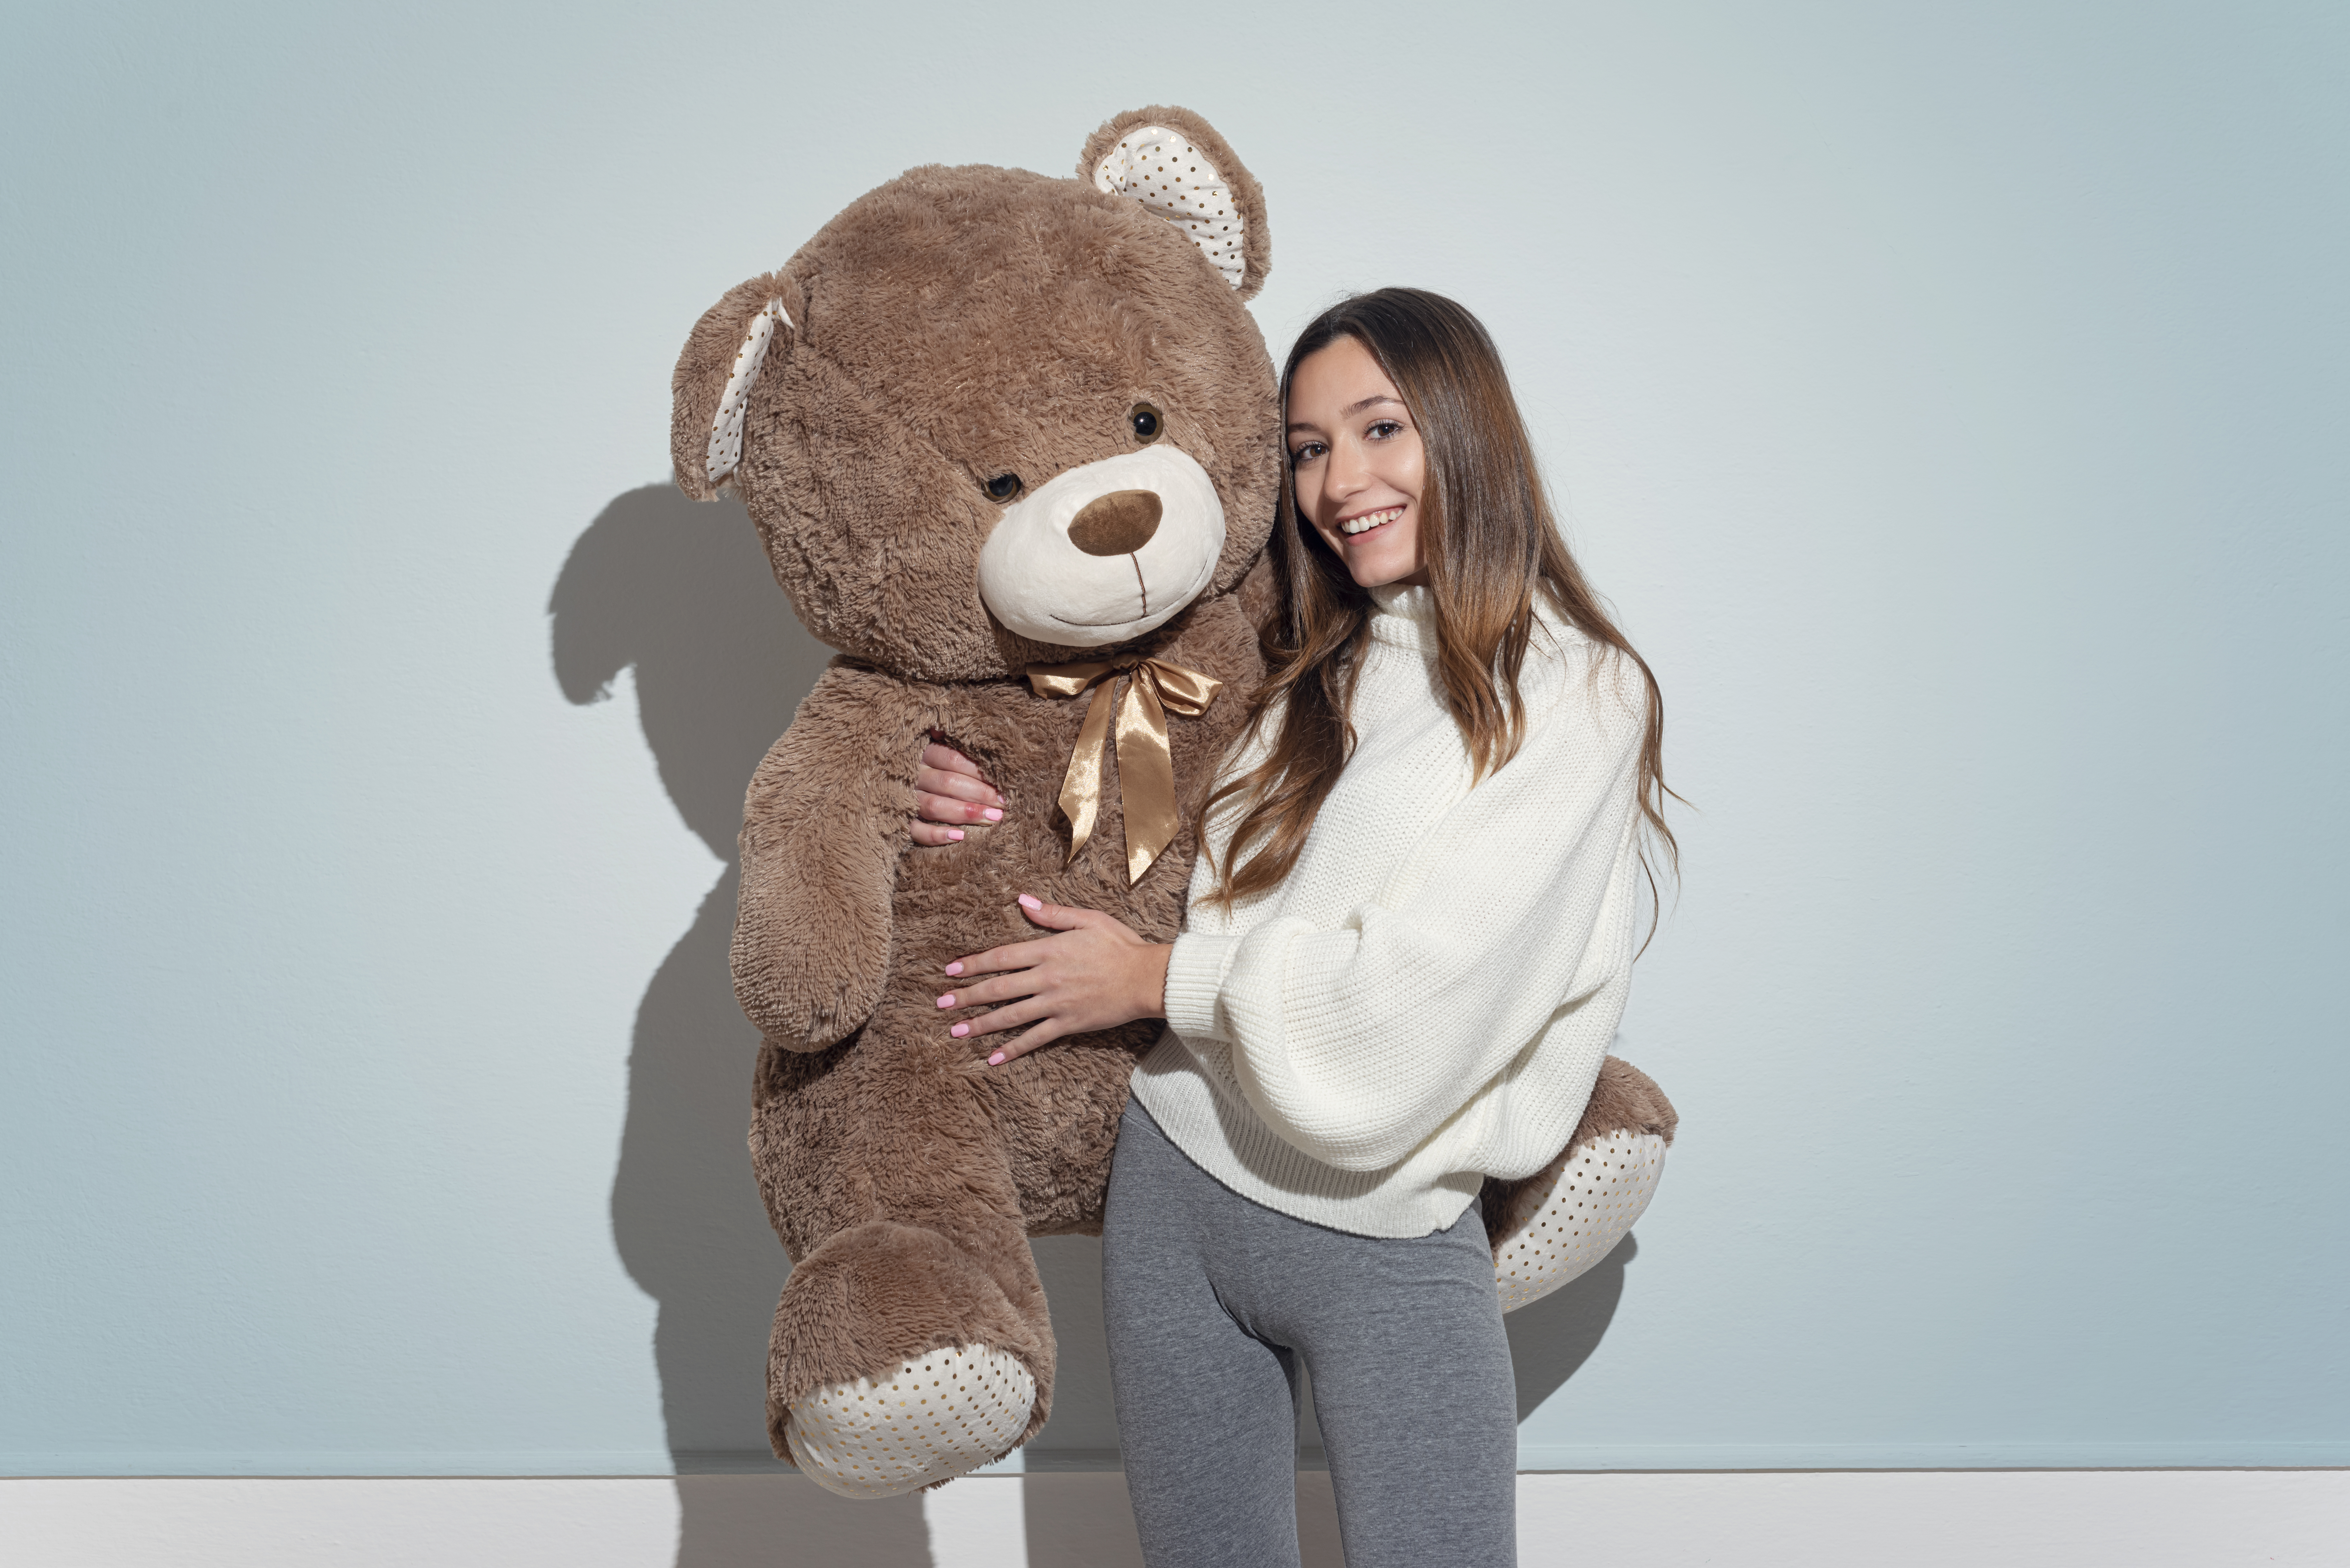 Woman holding a large teddy bear | Source: Getty Images